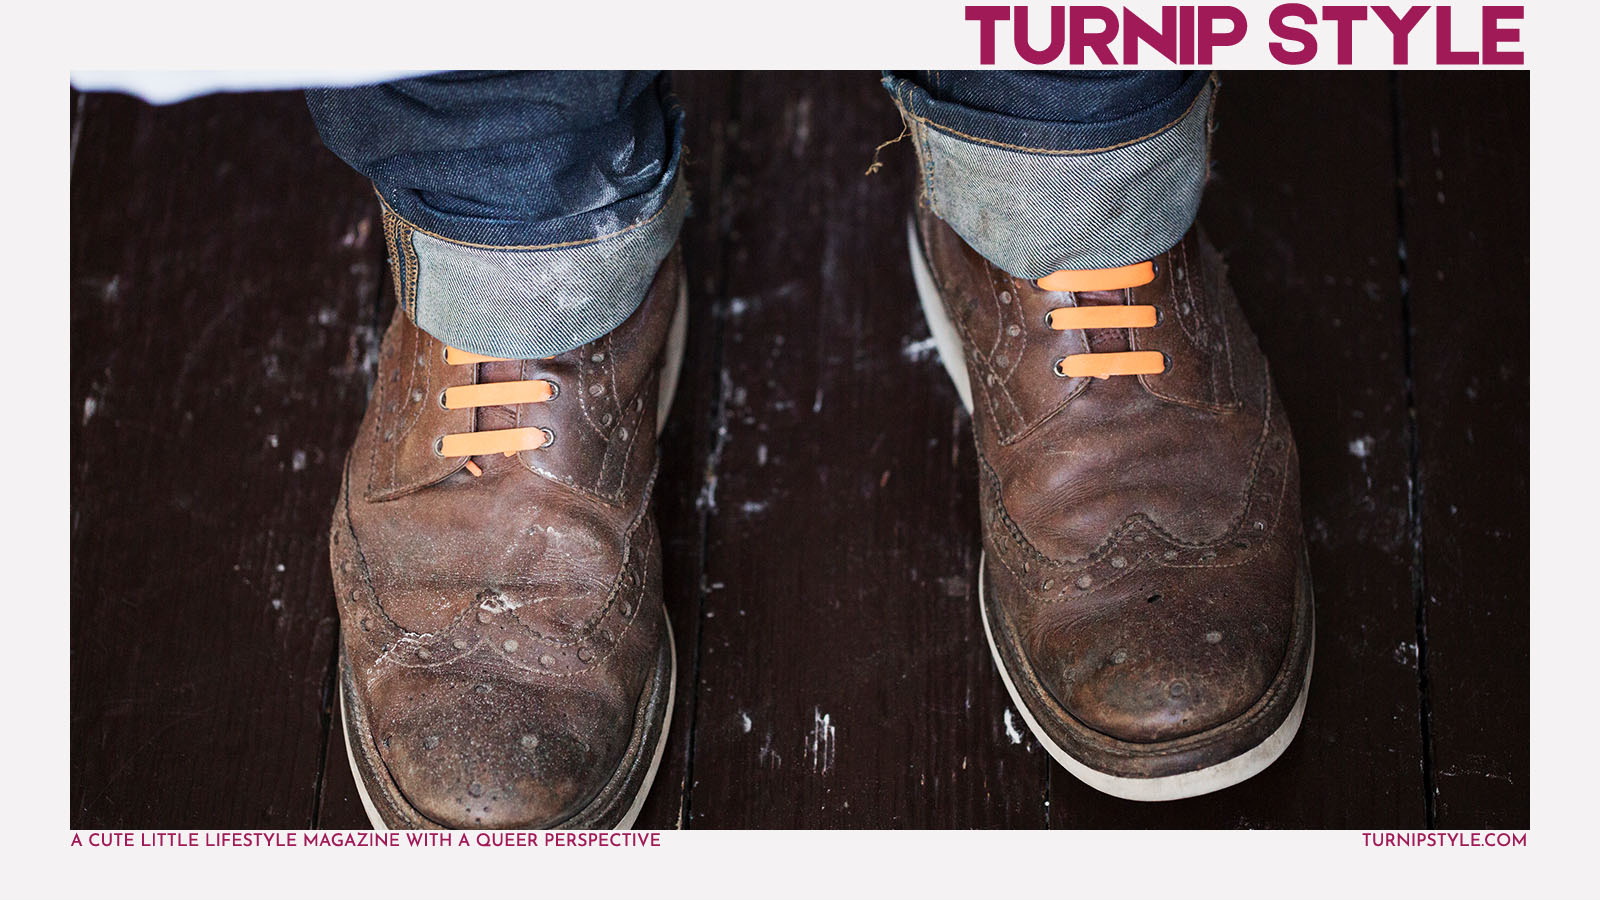 TURN UP YOUR STYLE WITH TURNIPSTYLE.COM